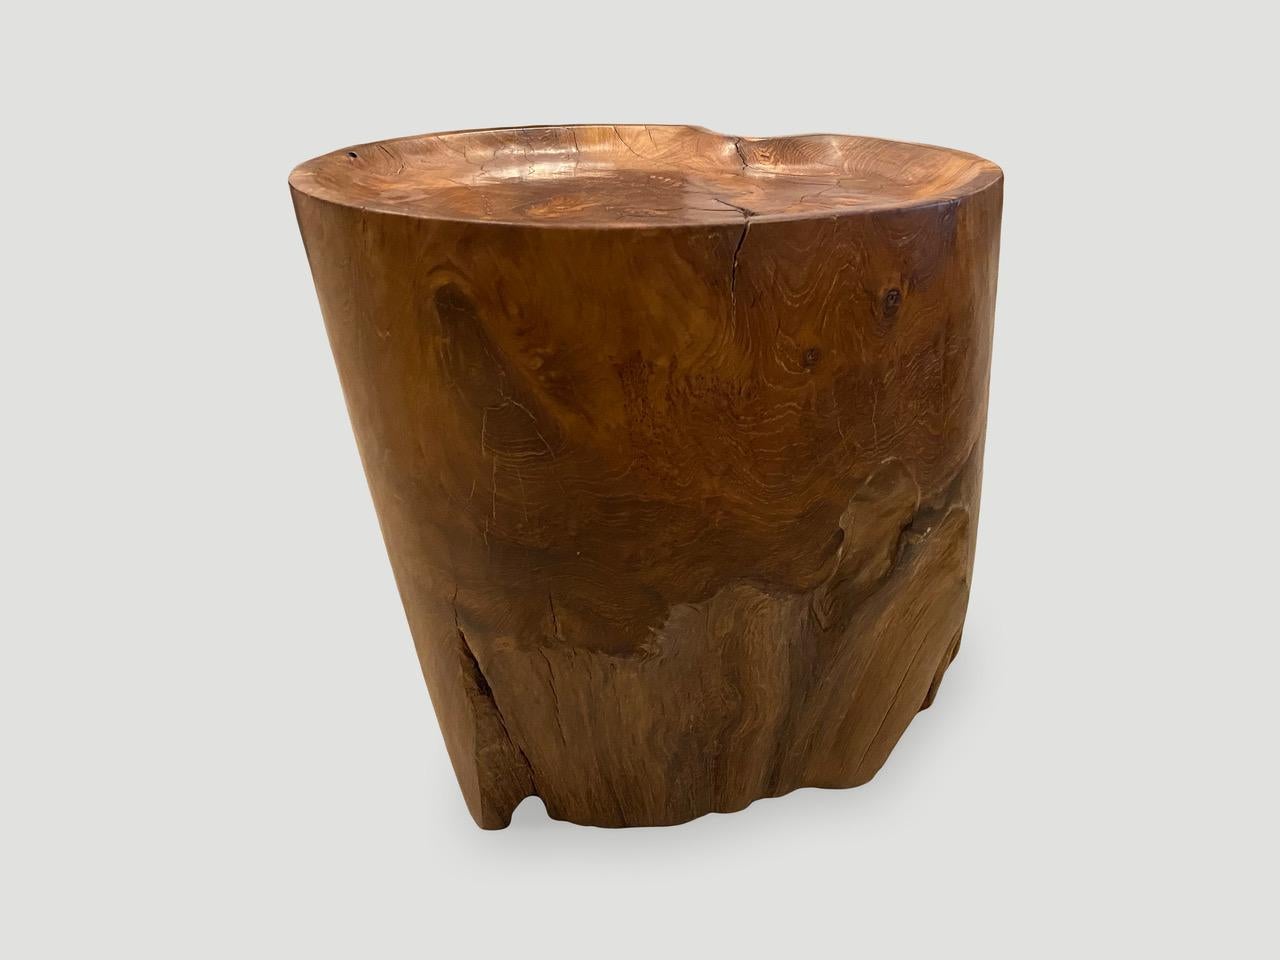 Andrianna Shamaris Organic Natural Teak Wood Tray Side Table In Excellent Condition For Sale In New York, NY